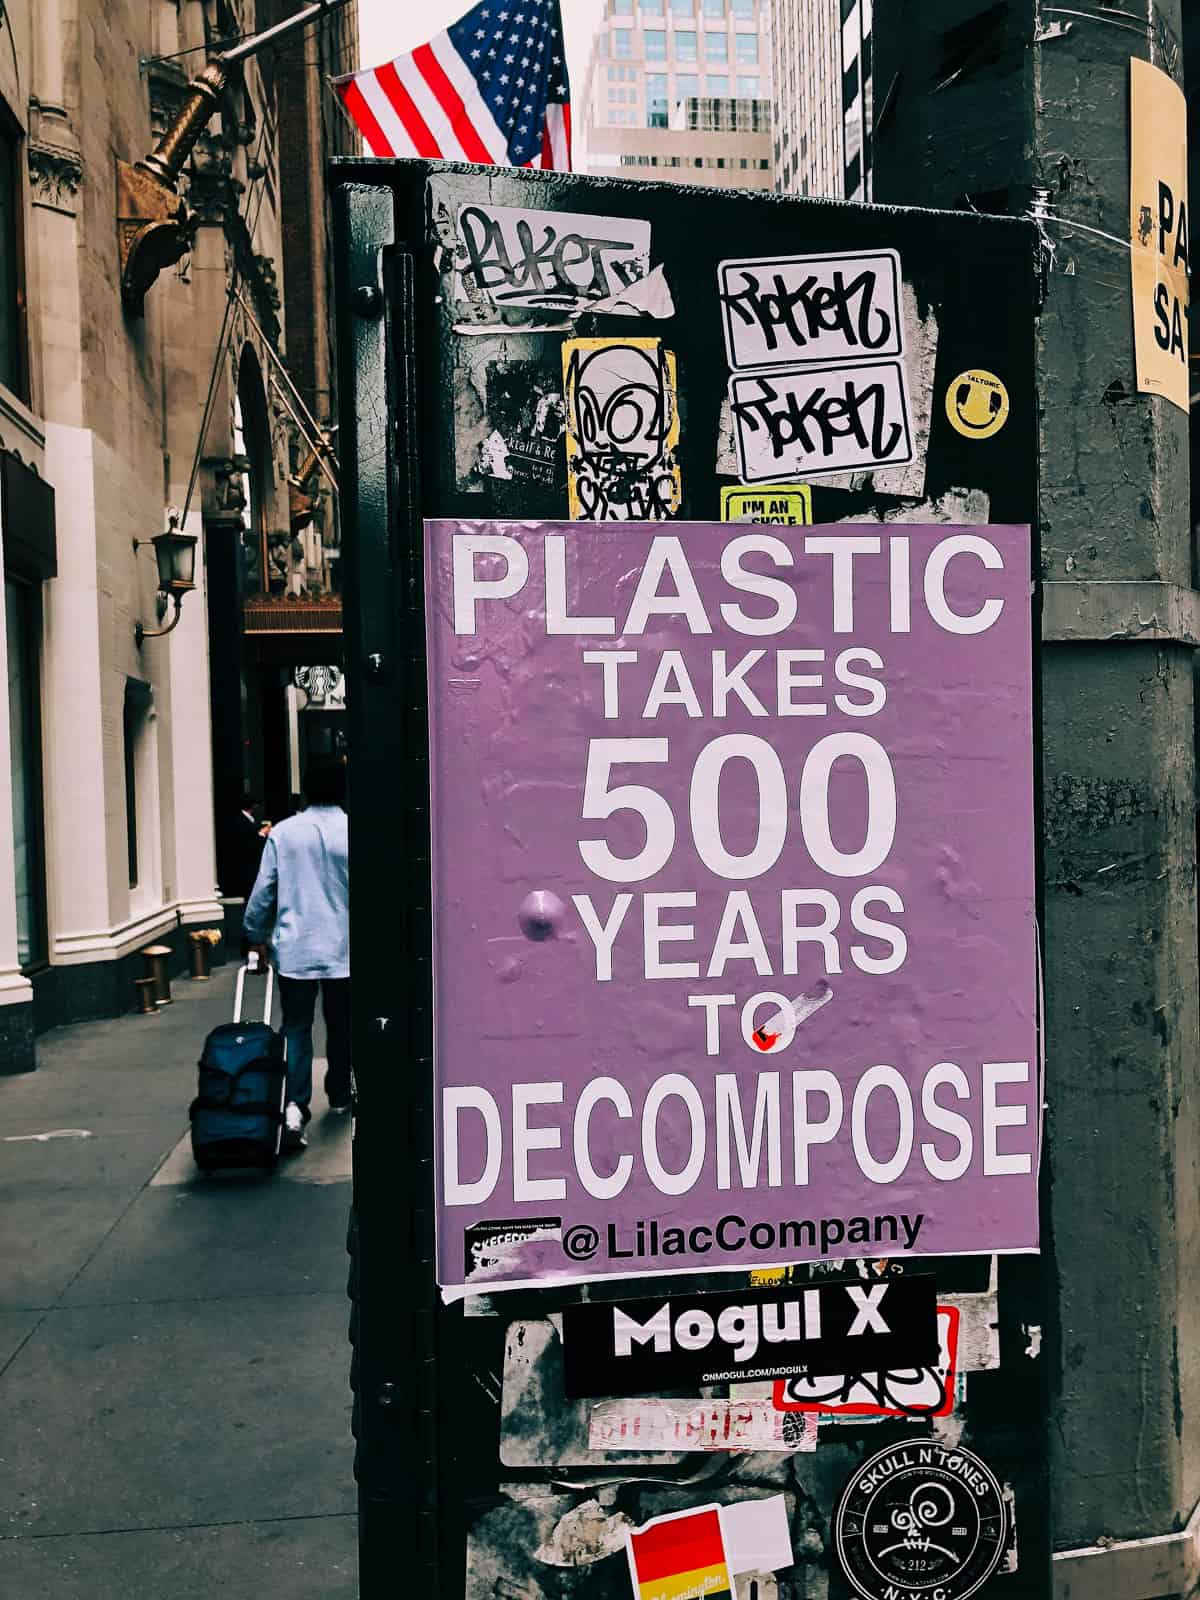 Poster on a street saying "Plastic takes 500 years to decompose"